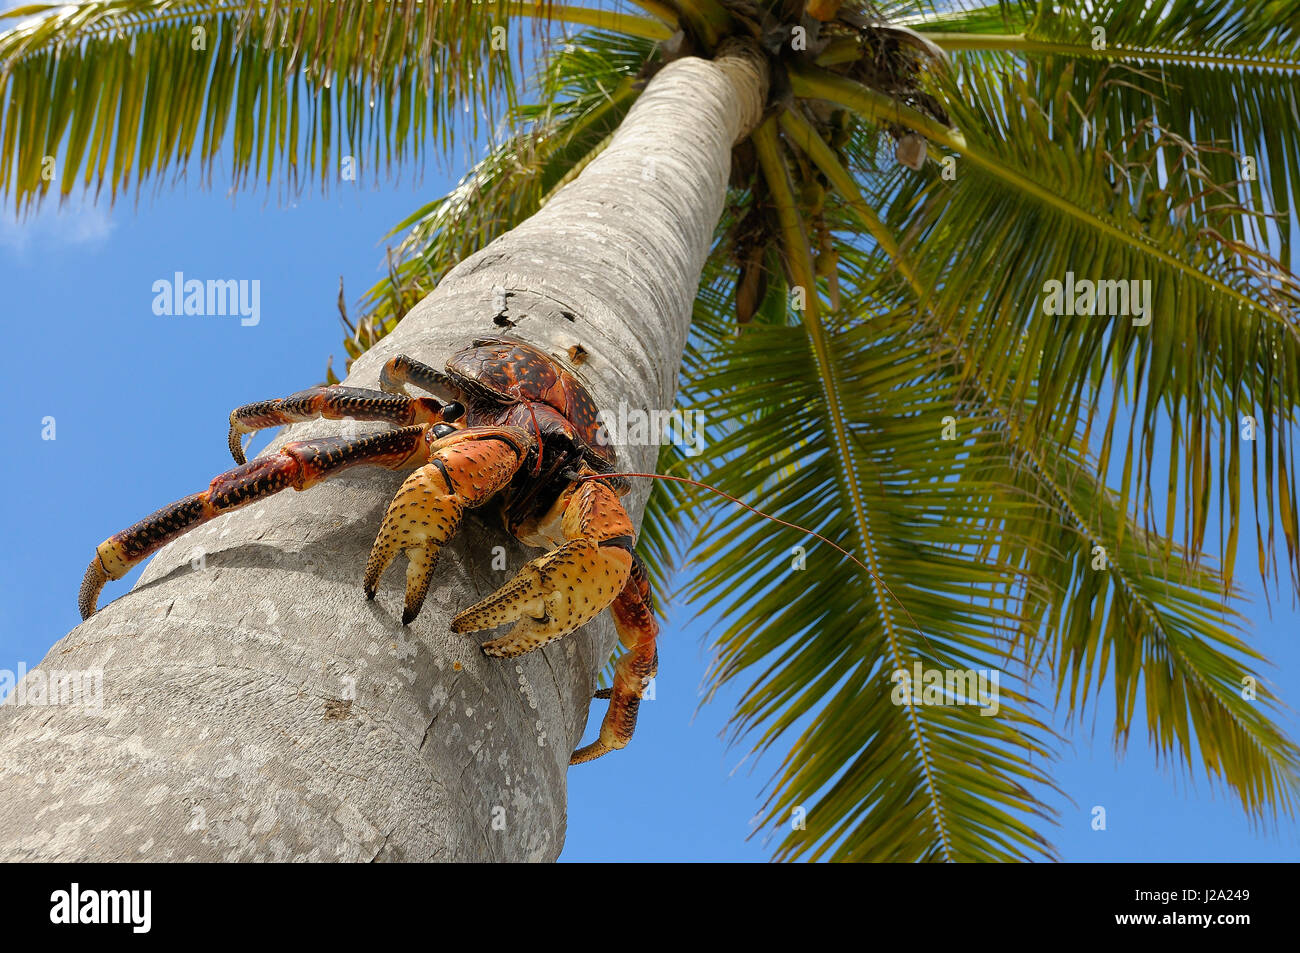 Coconut Crab in close-up on palm tree Stock Photo